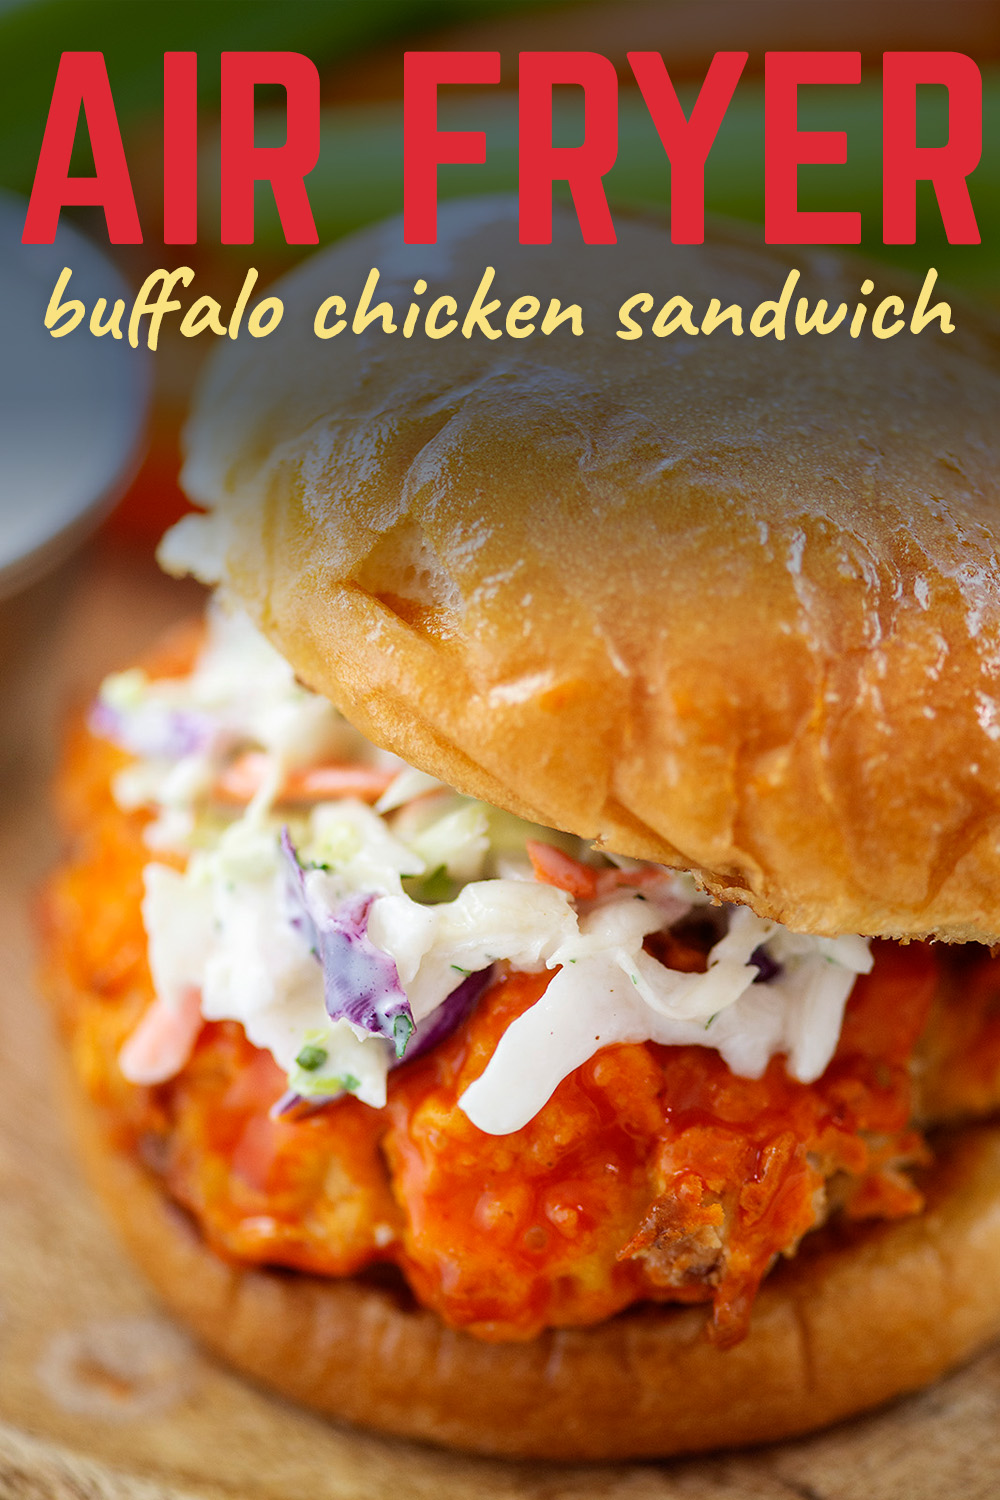 We air fried our crispy chicken sandwich and added buffalo sauce and cole slaw.  This could be the most perfect spicy chicken sandwich ever!